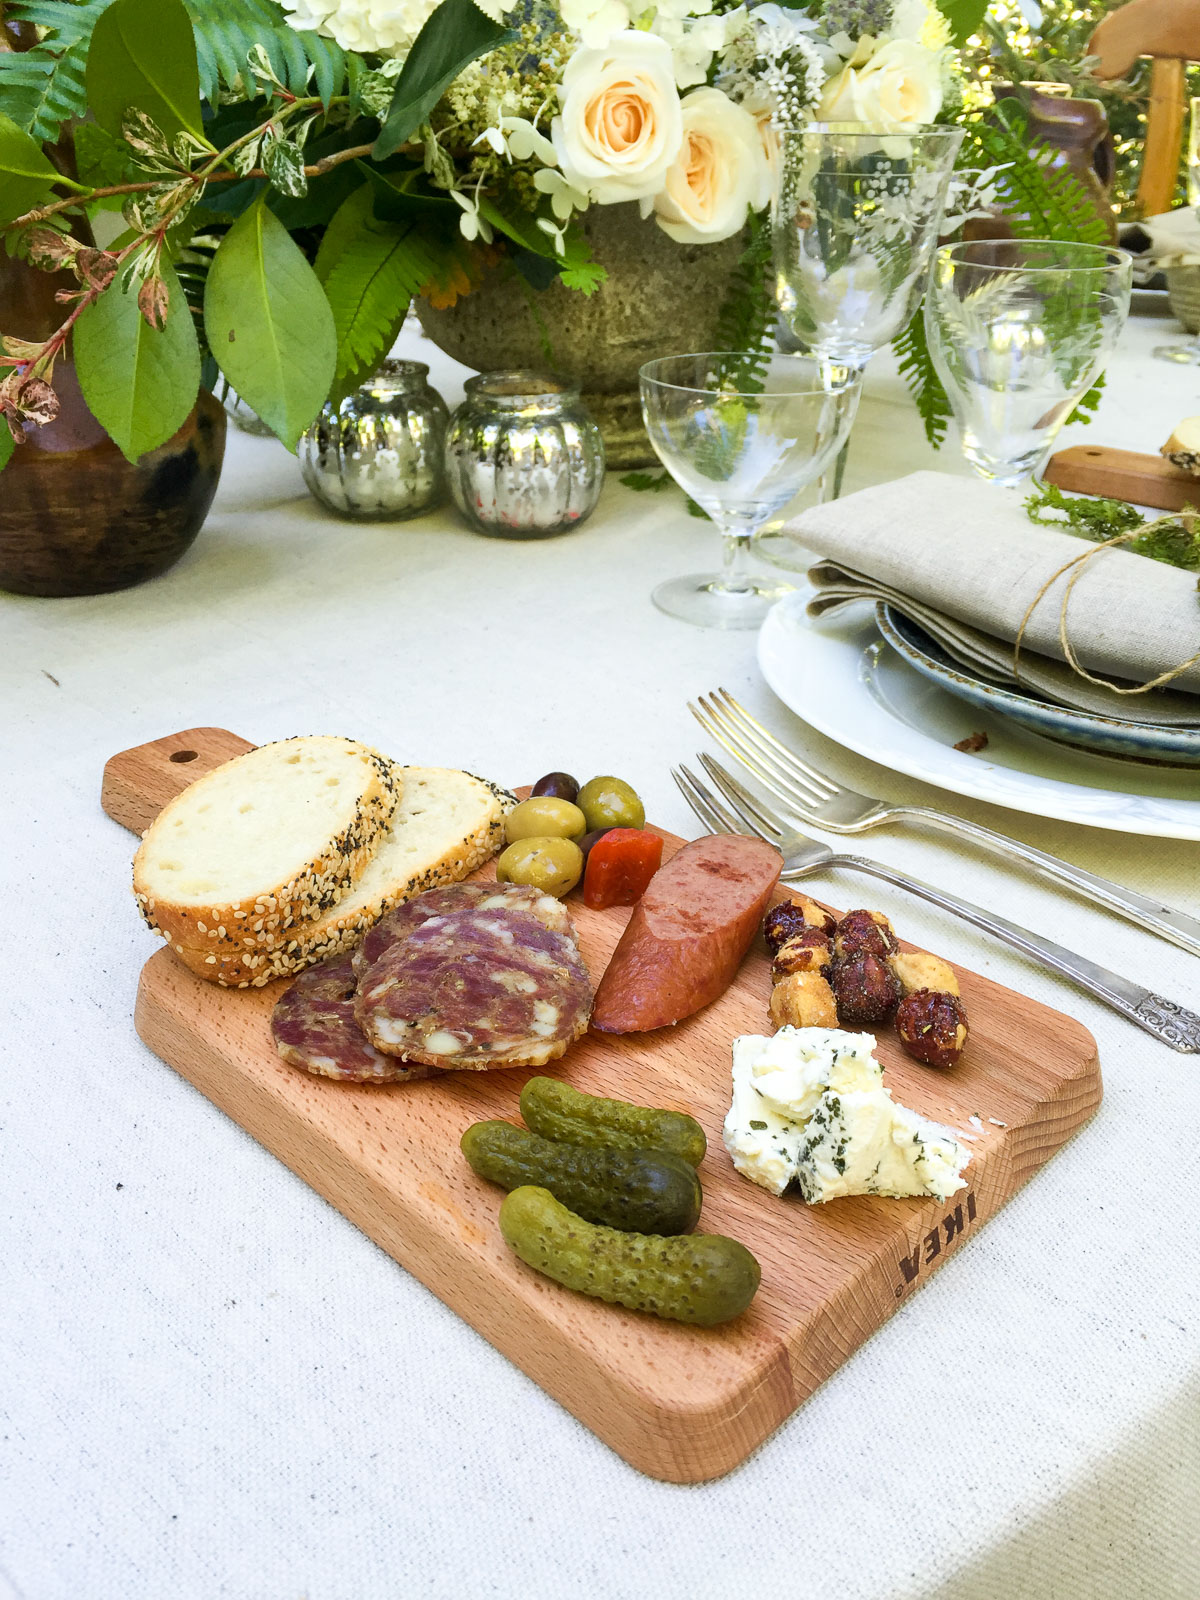 Use small cutting boards to create mini charcuterie boards or cheese plates for a casual-chic gathering.